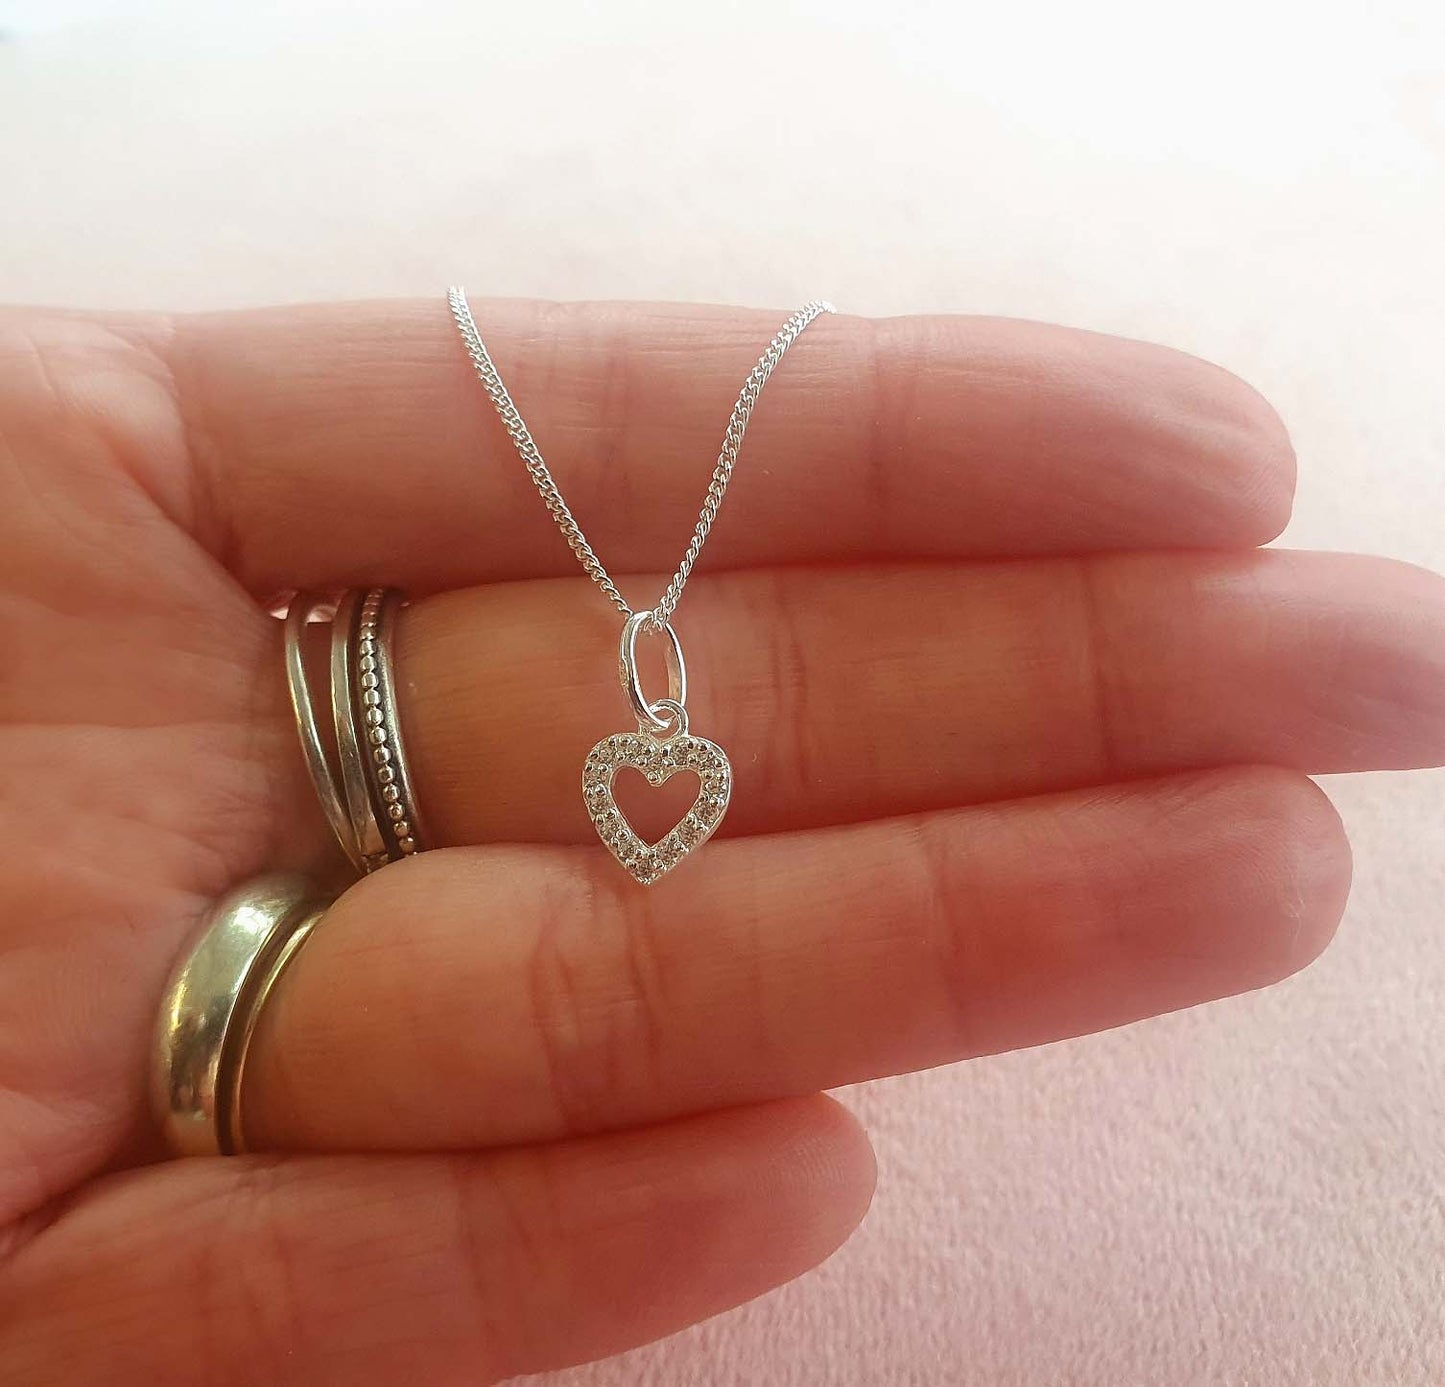 Godmother Heart Necklace with Cubic Zirconia in Sterling Silver 925, Personalised Gift